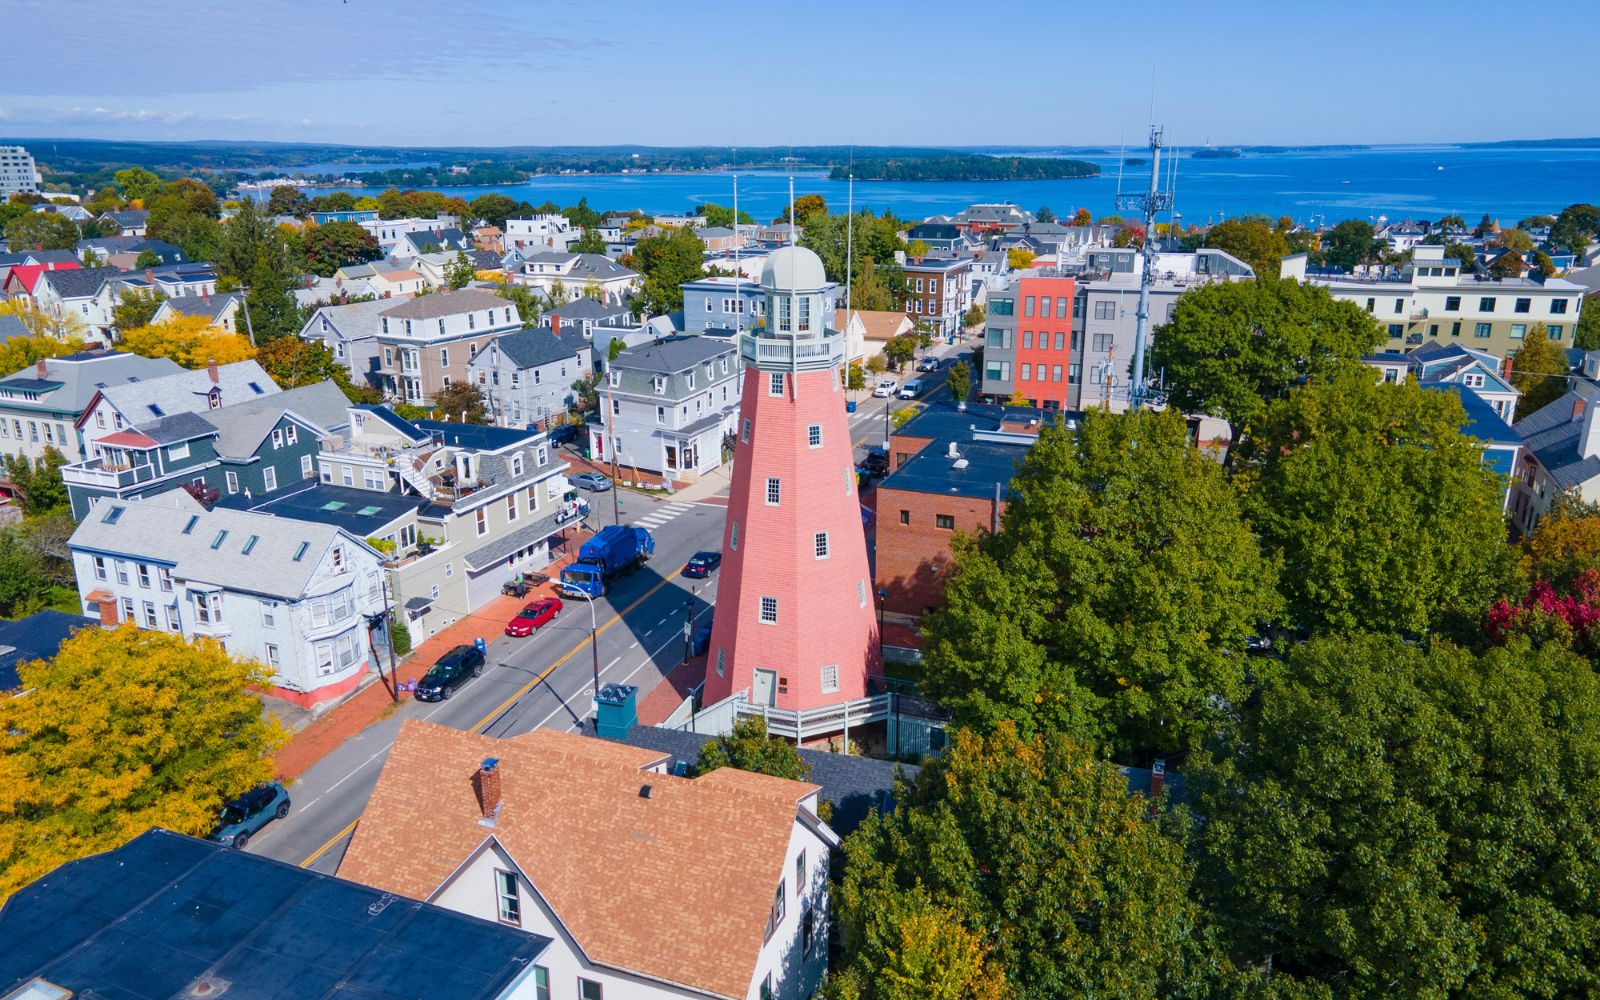 Portland Observatory aerial view at 138 Congress Street on Munjoy Hill in Portland, Maine